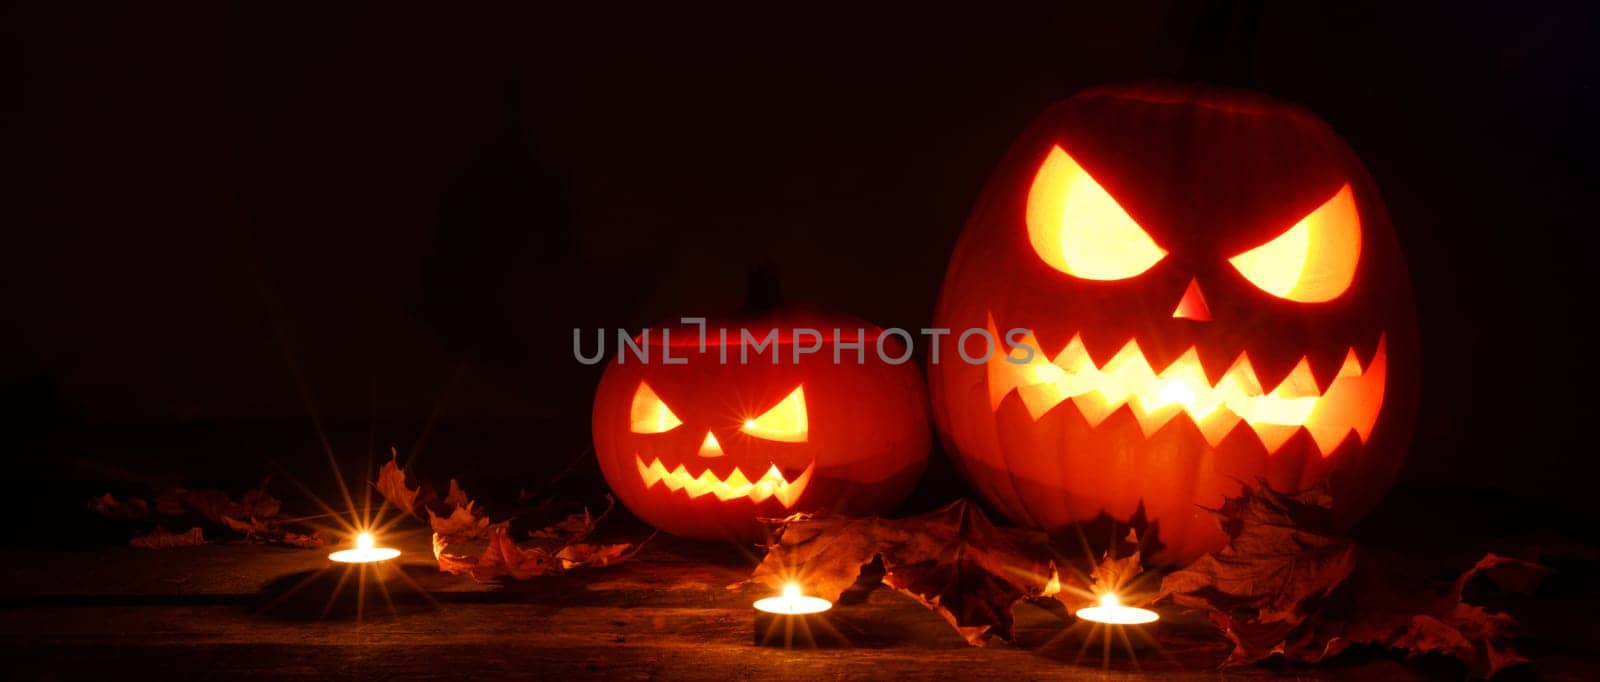 Three Halloween Pumpkins and candles by Yellowj